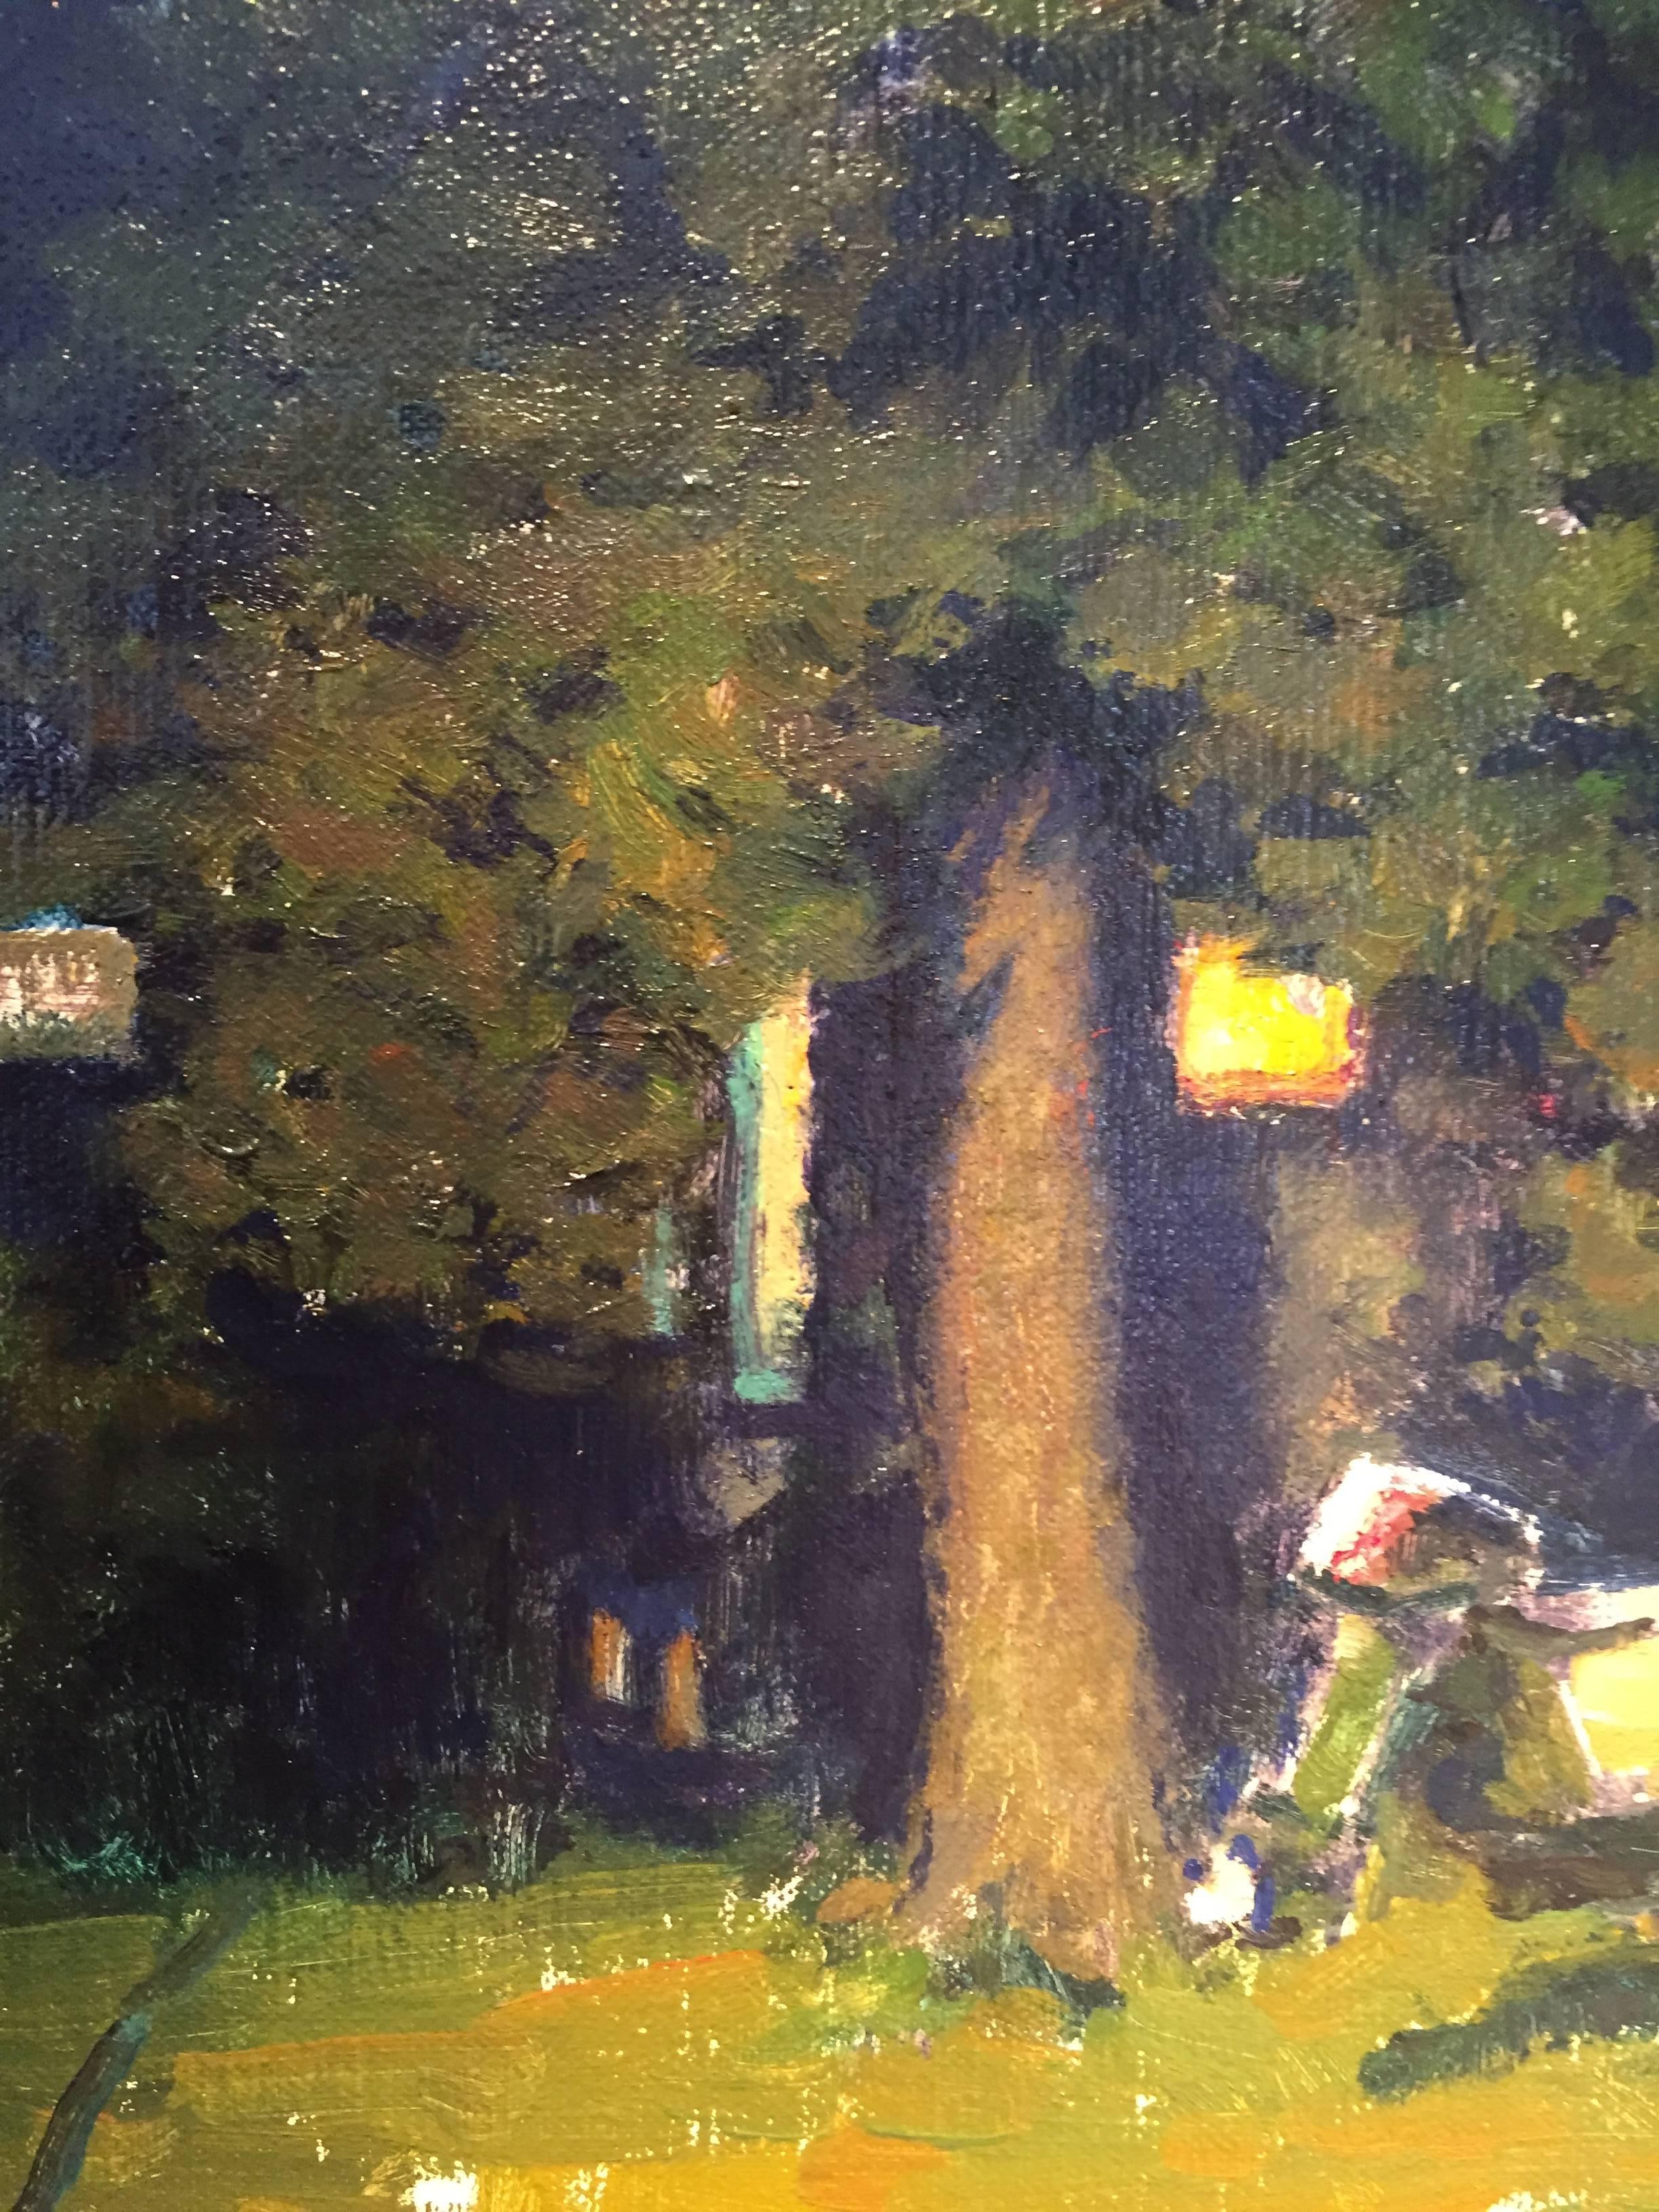 Painted en plein air, at night, a small boat sits on wheels, on a front lawn. The house is hidden beneath the shade of a tall tree that takes up the center of the image. Small Square windows gleam with light from inside, a green light connotes a